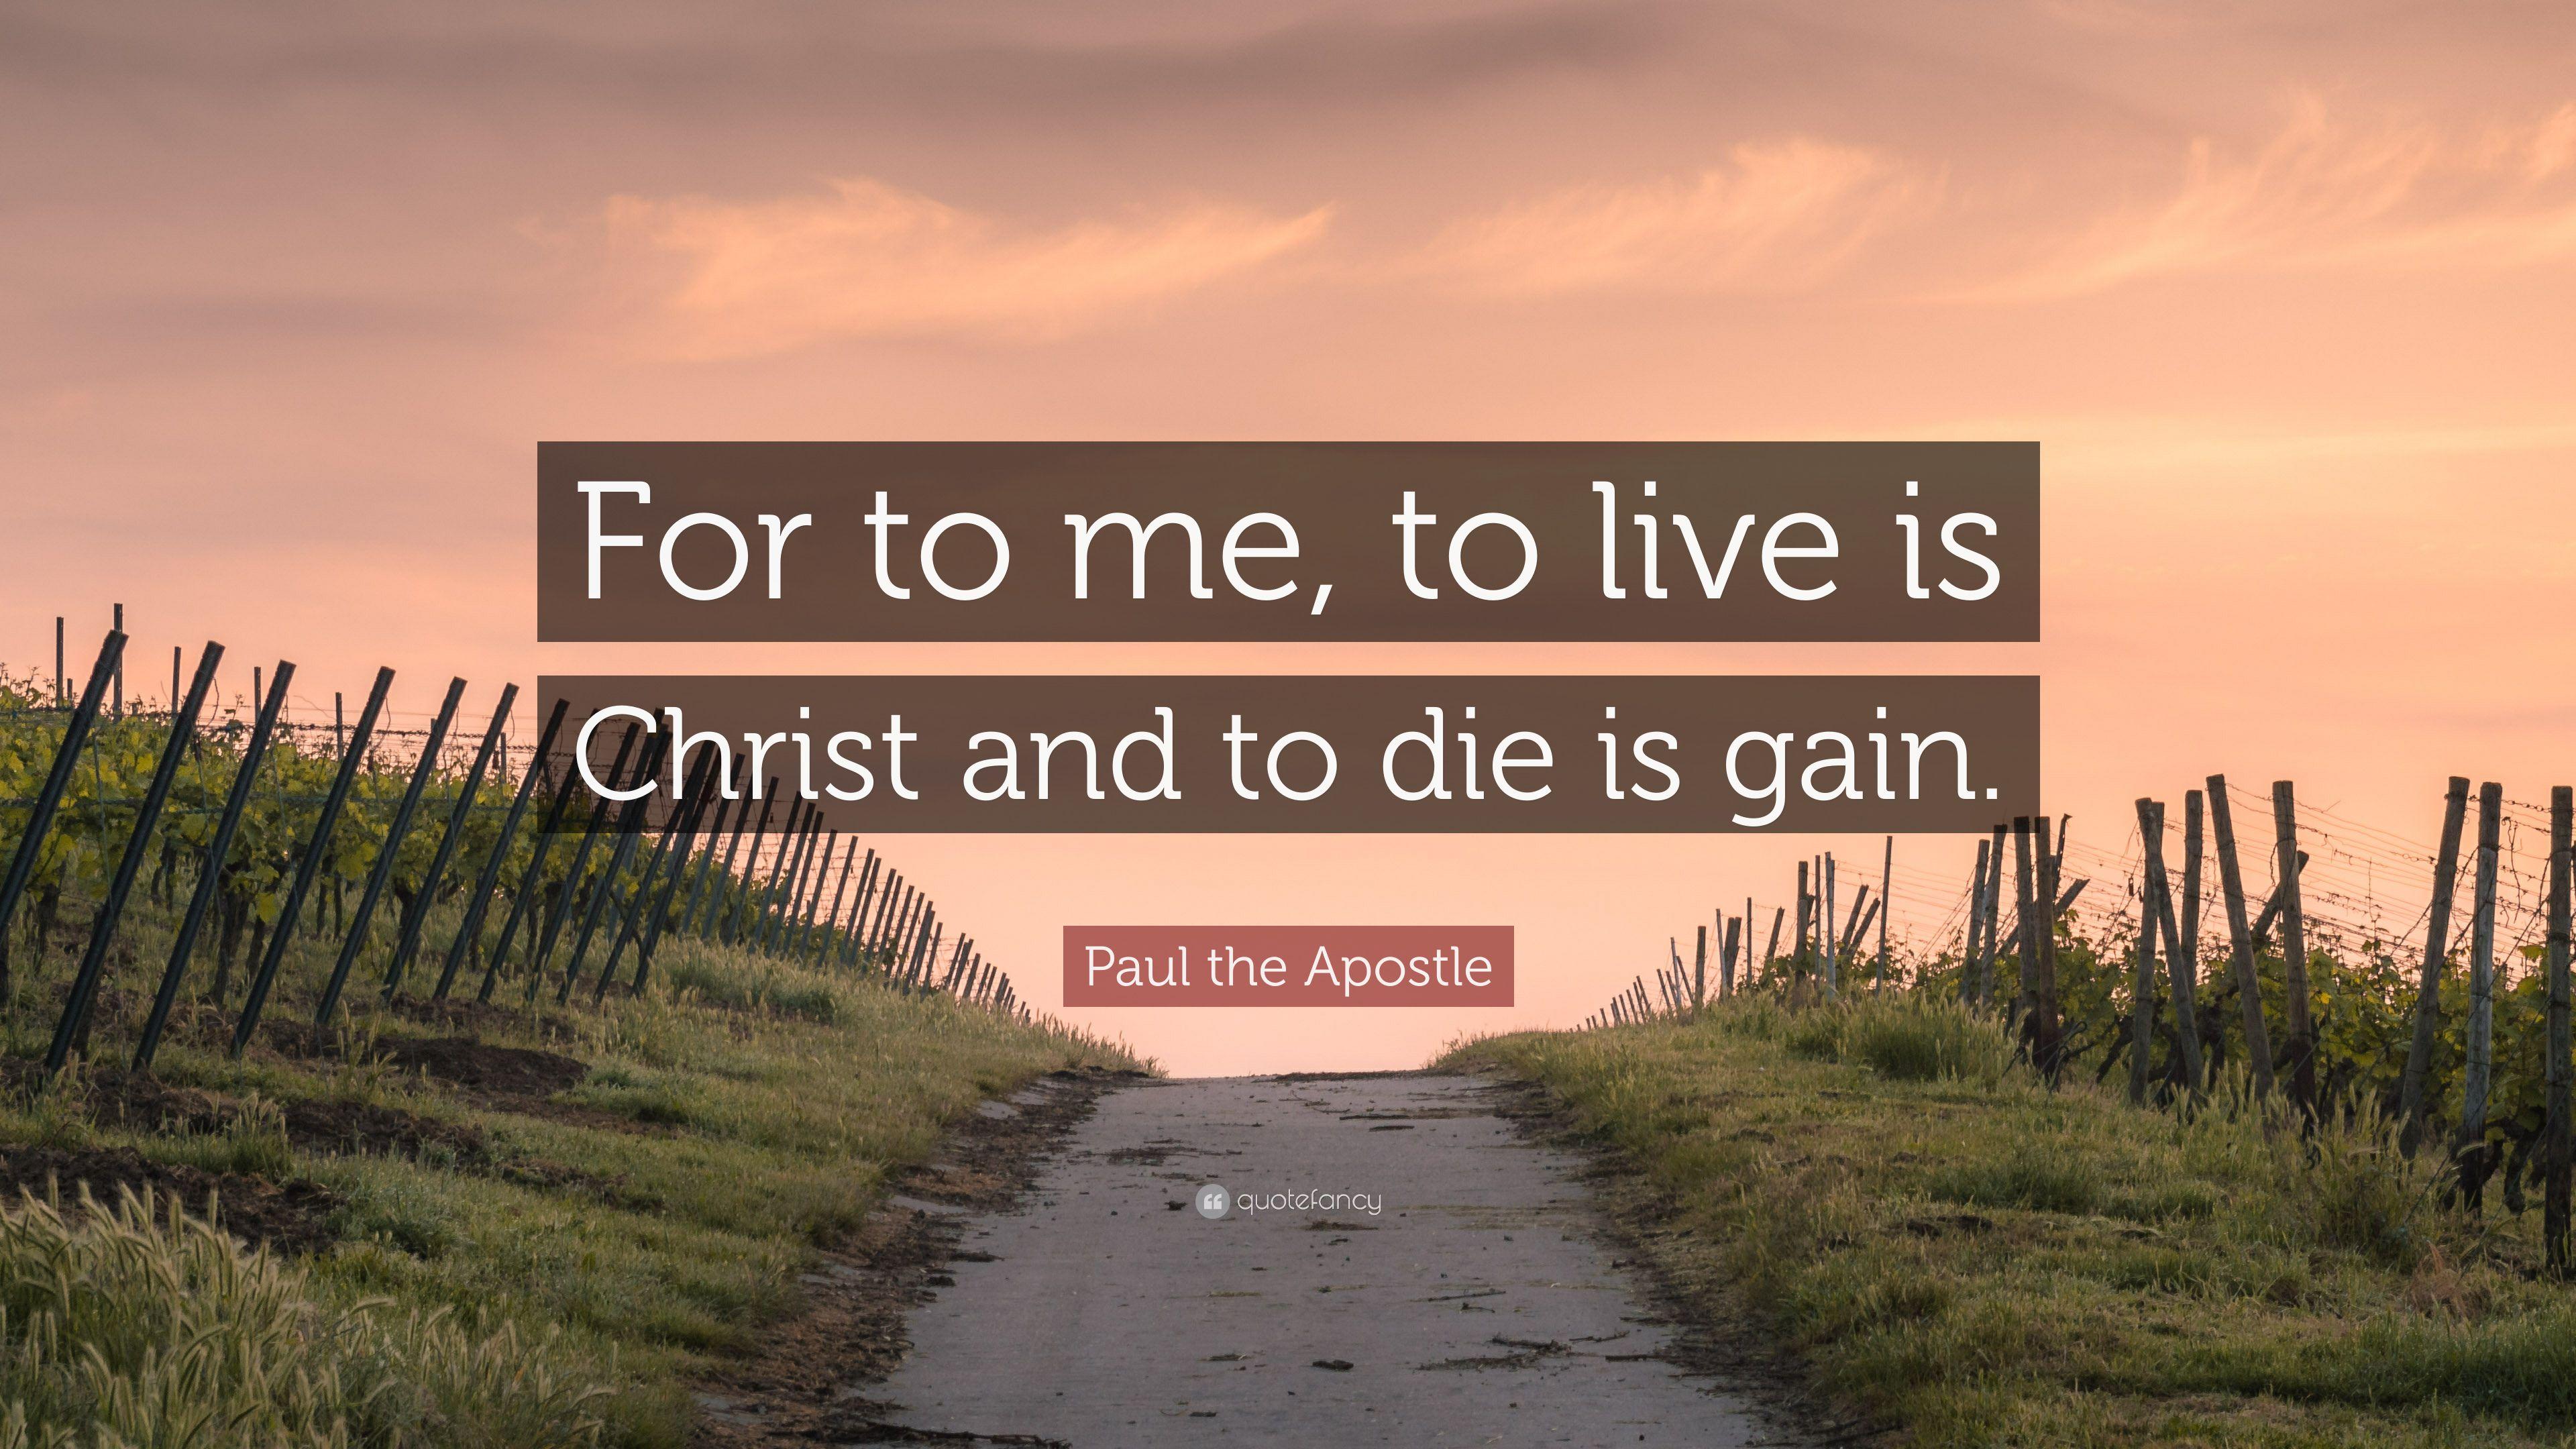 Paul the Apostle Quote: “For to me, to live is Christ and to die